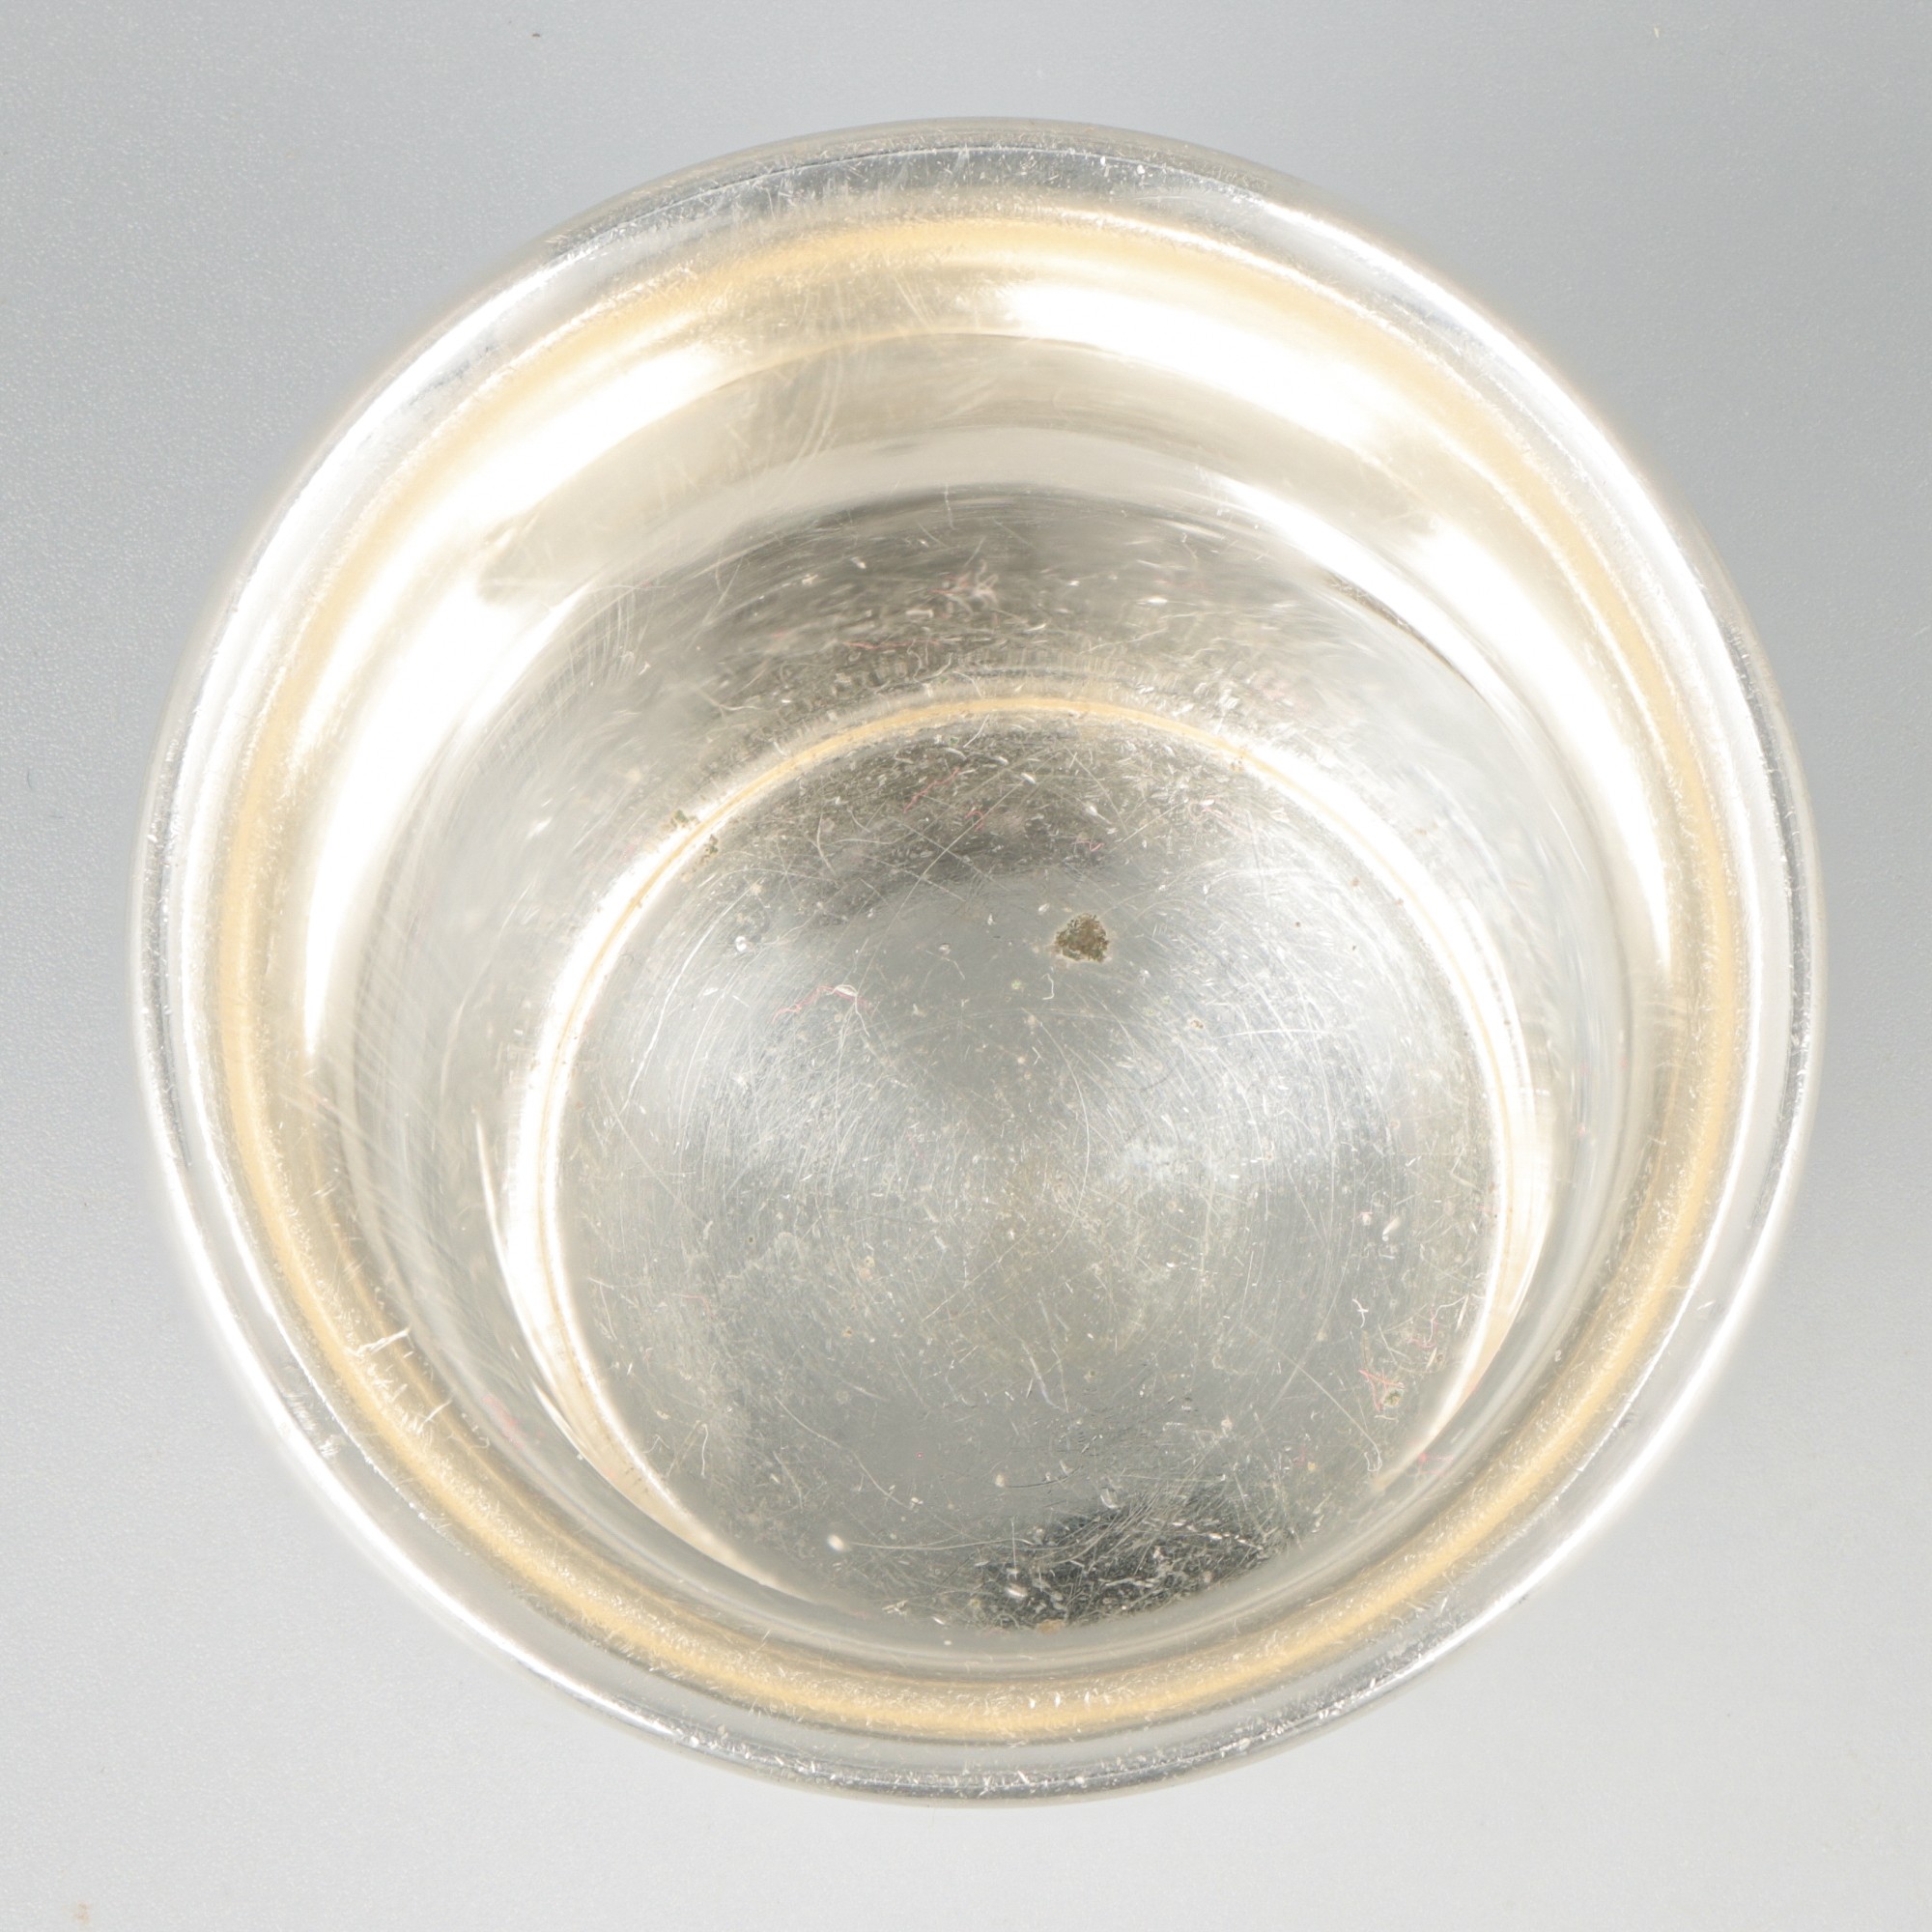 Drinking cup silver. - Image 4 of 6